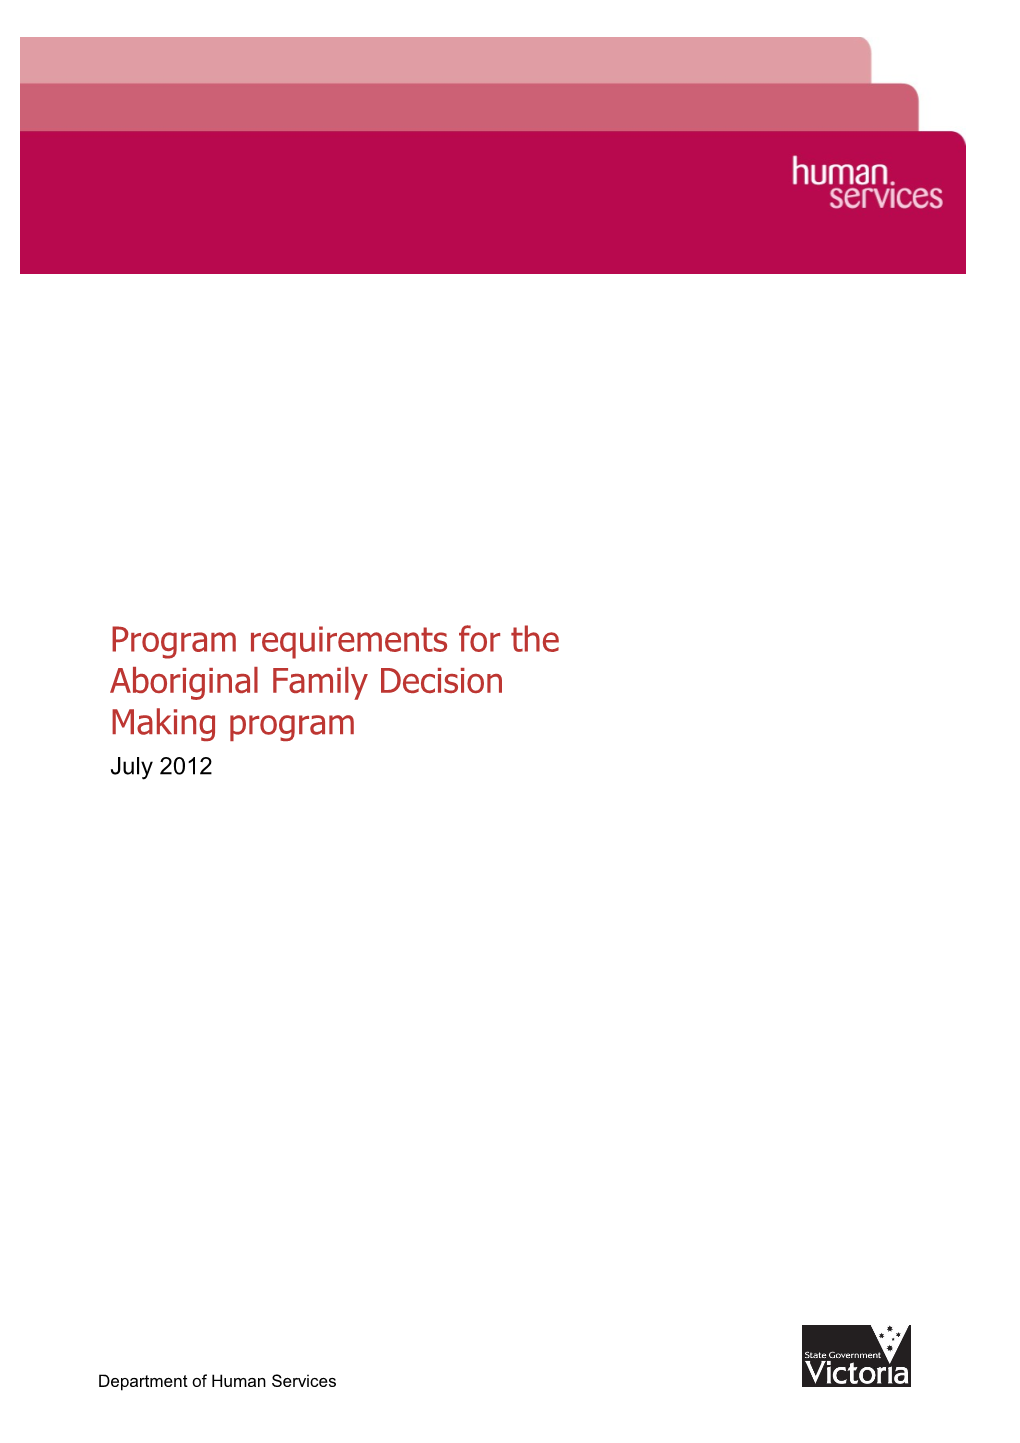 Program Requirements for the Aboriginal Family Decision Making Program